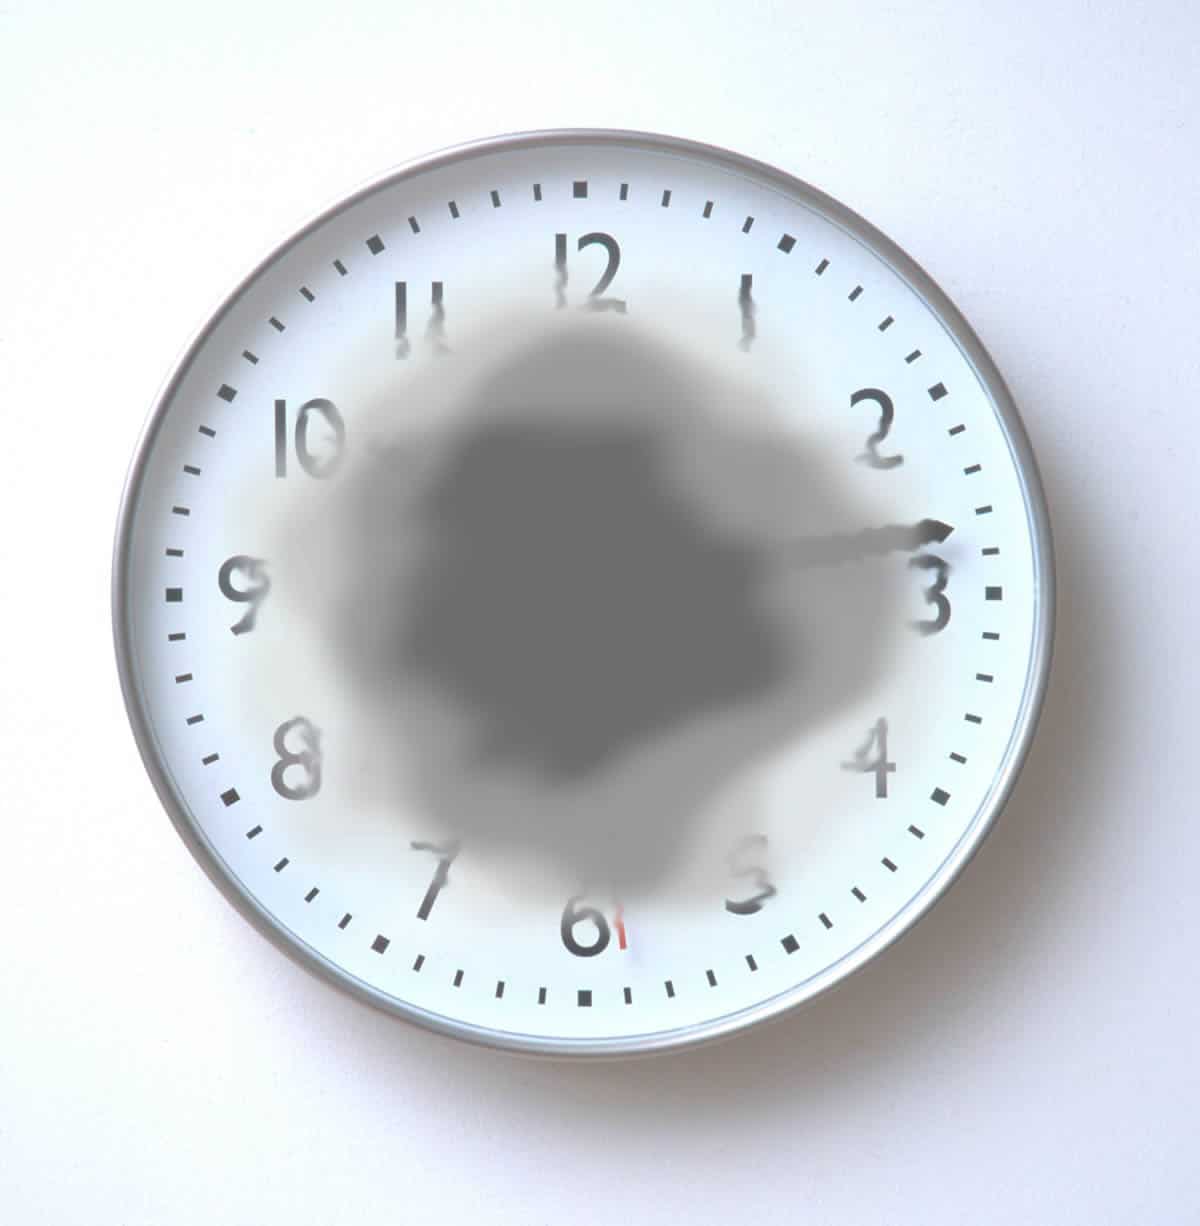 Clock with dark, blurred center to represent vision loss from macular degeneration